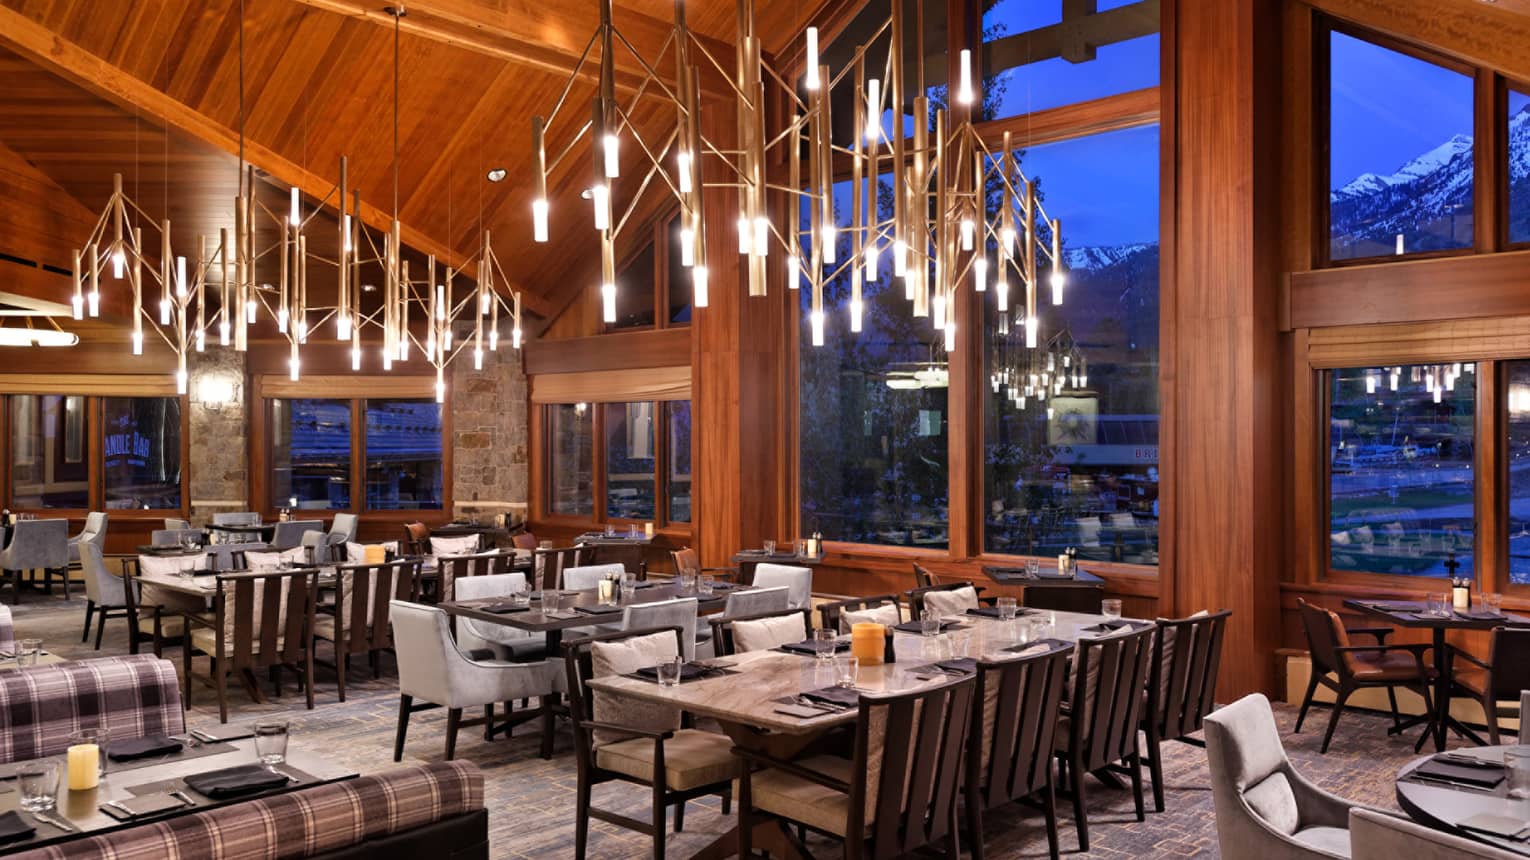 Empty dining room, wooden ceiling and exposed beams, bright chandeliers